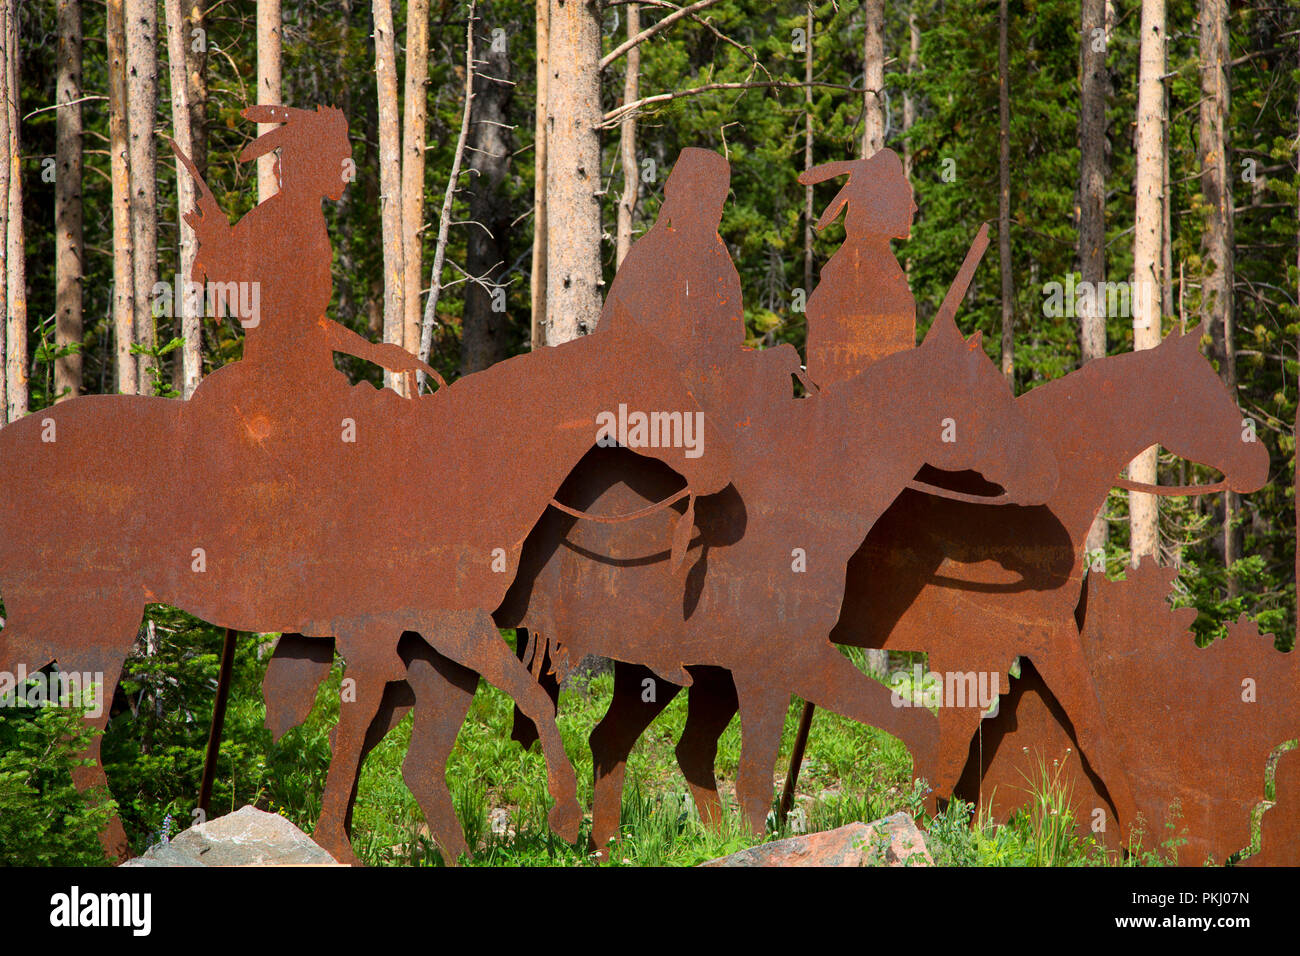 Silhouette sculpture, Nez Perce (Nee-Me-Poo) National Historic Trail, Gallatin National Forest, Beartooth Scenic Byway,  Montana Stock Photo